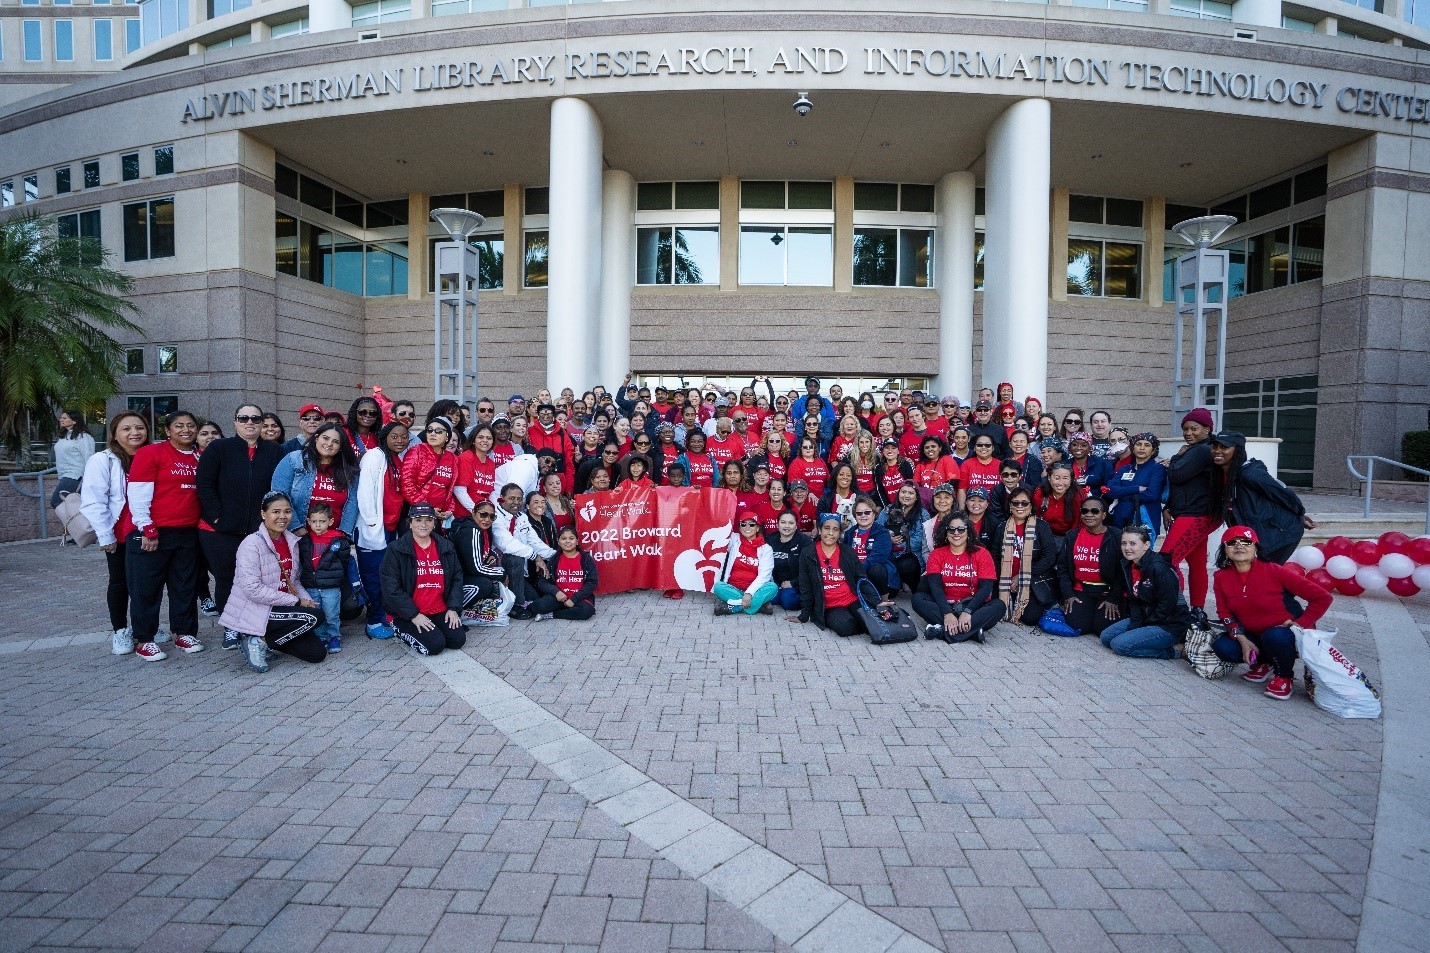 The 2022 Heart walk was attended by many employees, patients, and families.